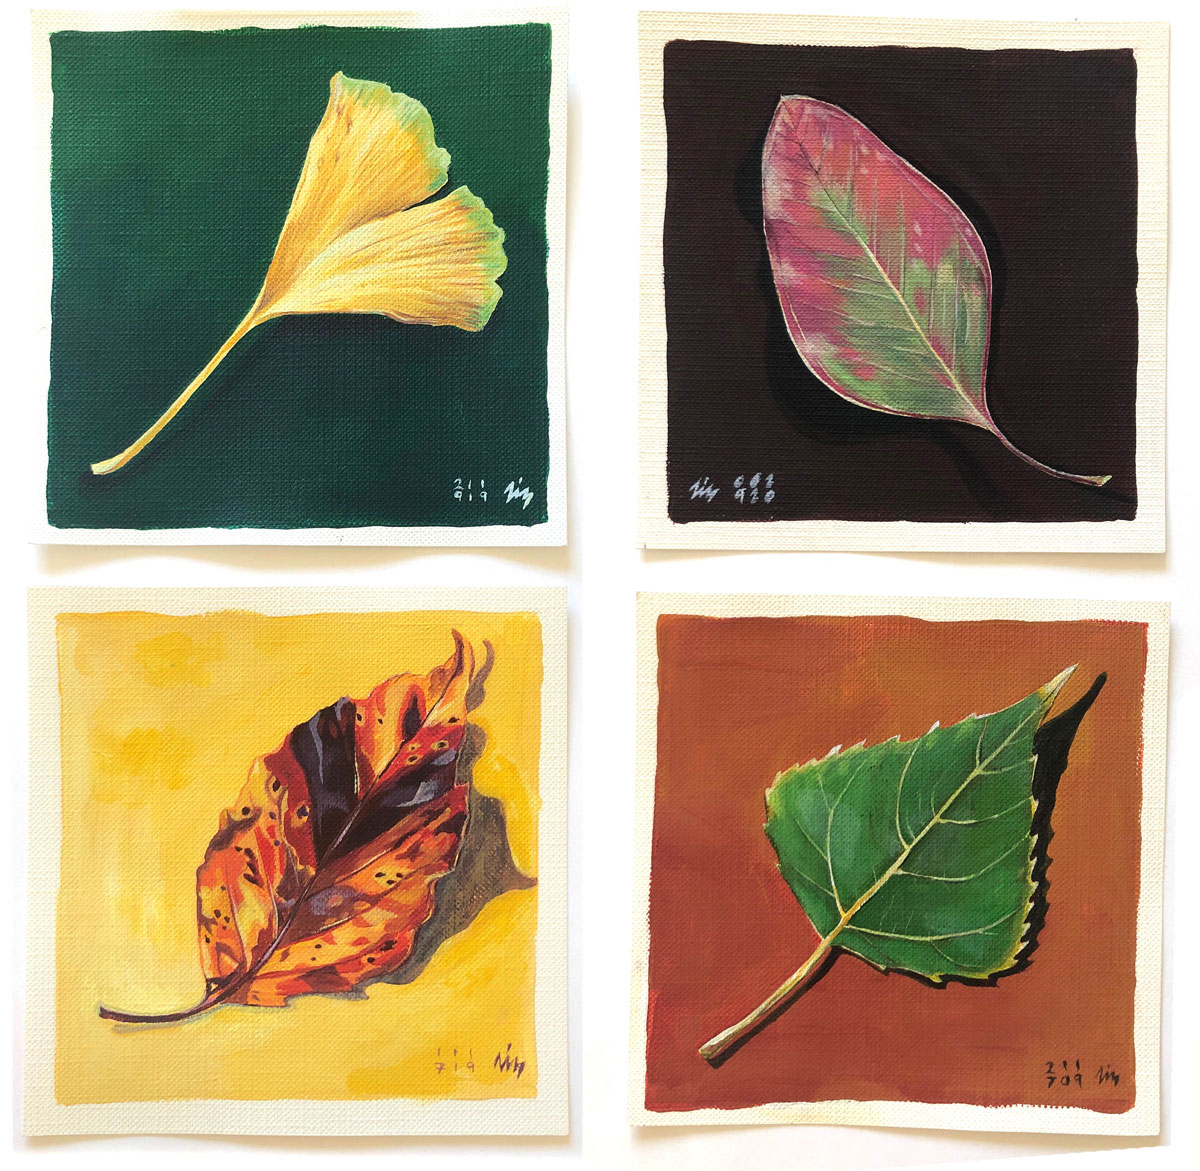 Fall Leaves, a series of small paintings by Liz Broekhuyse